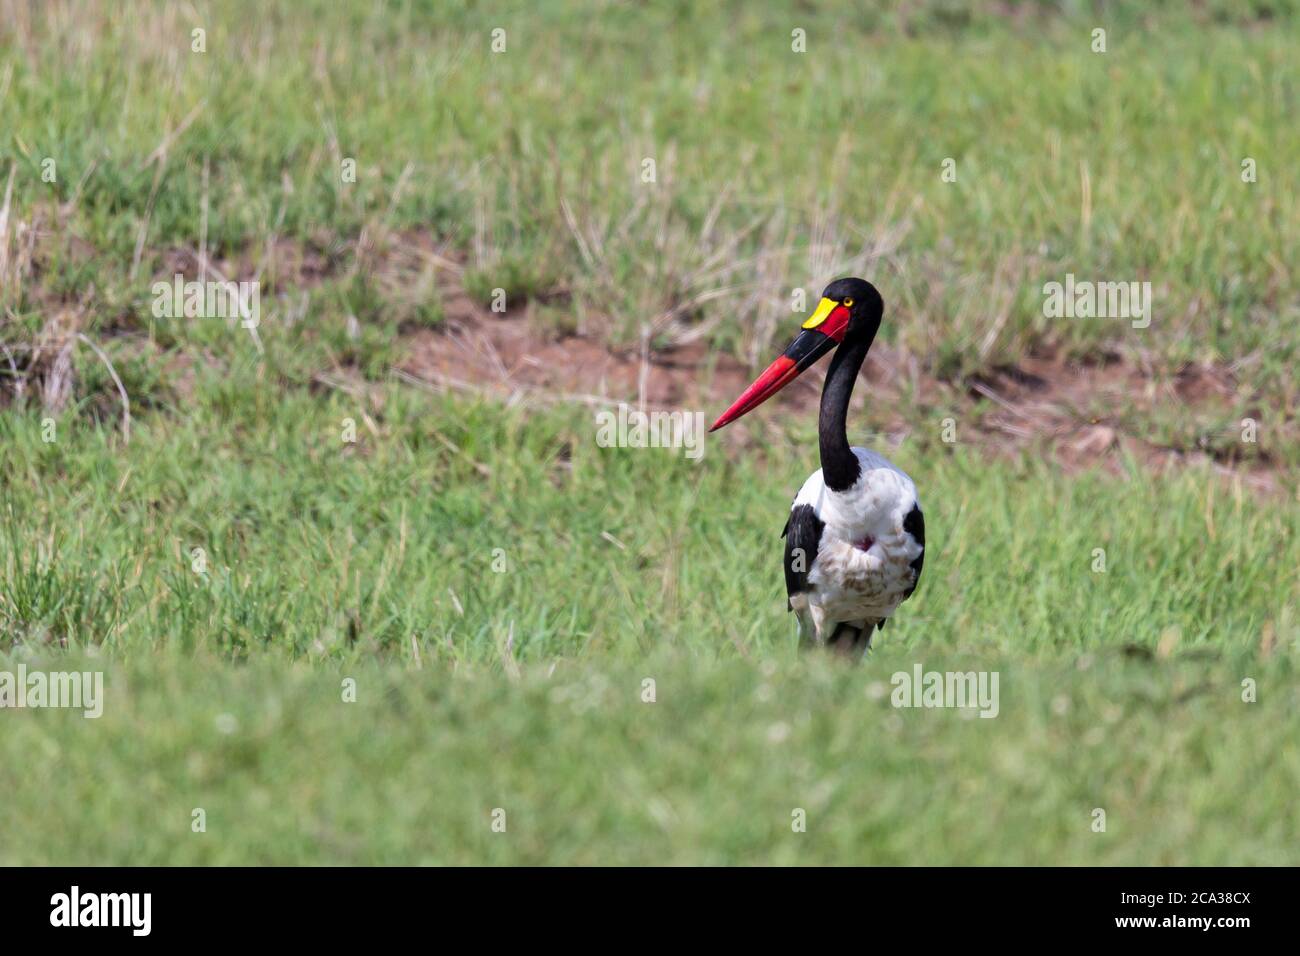 One stork with black red golden beak is standing in the grass. Stock Photo